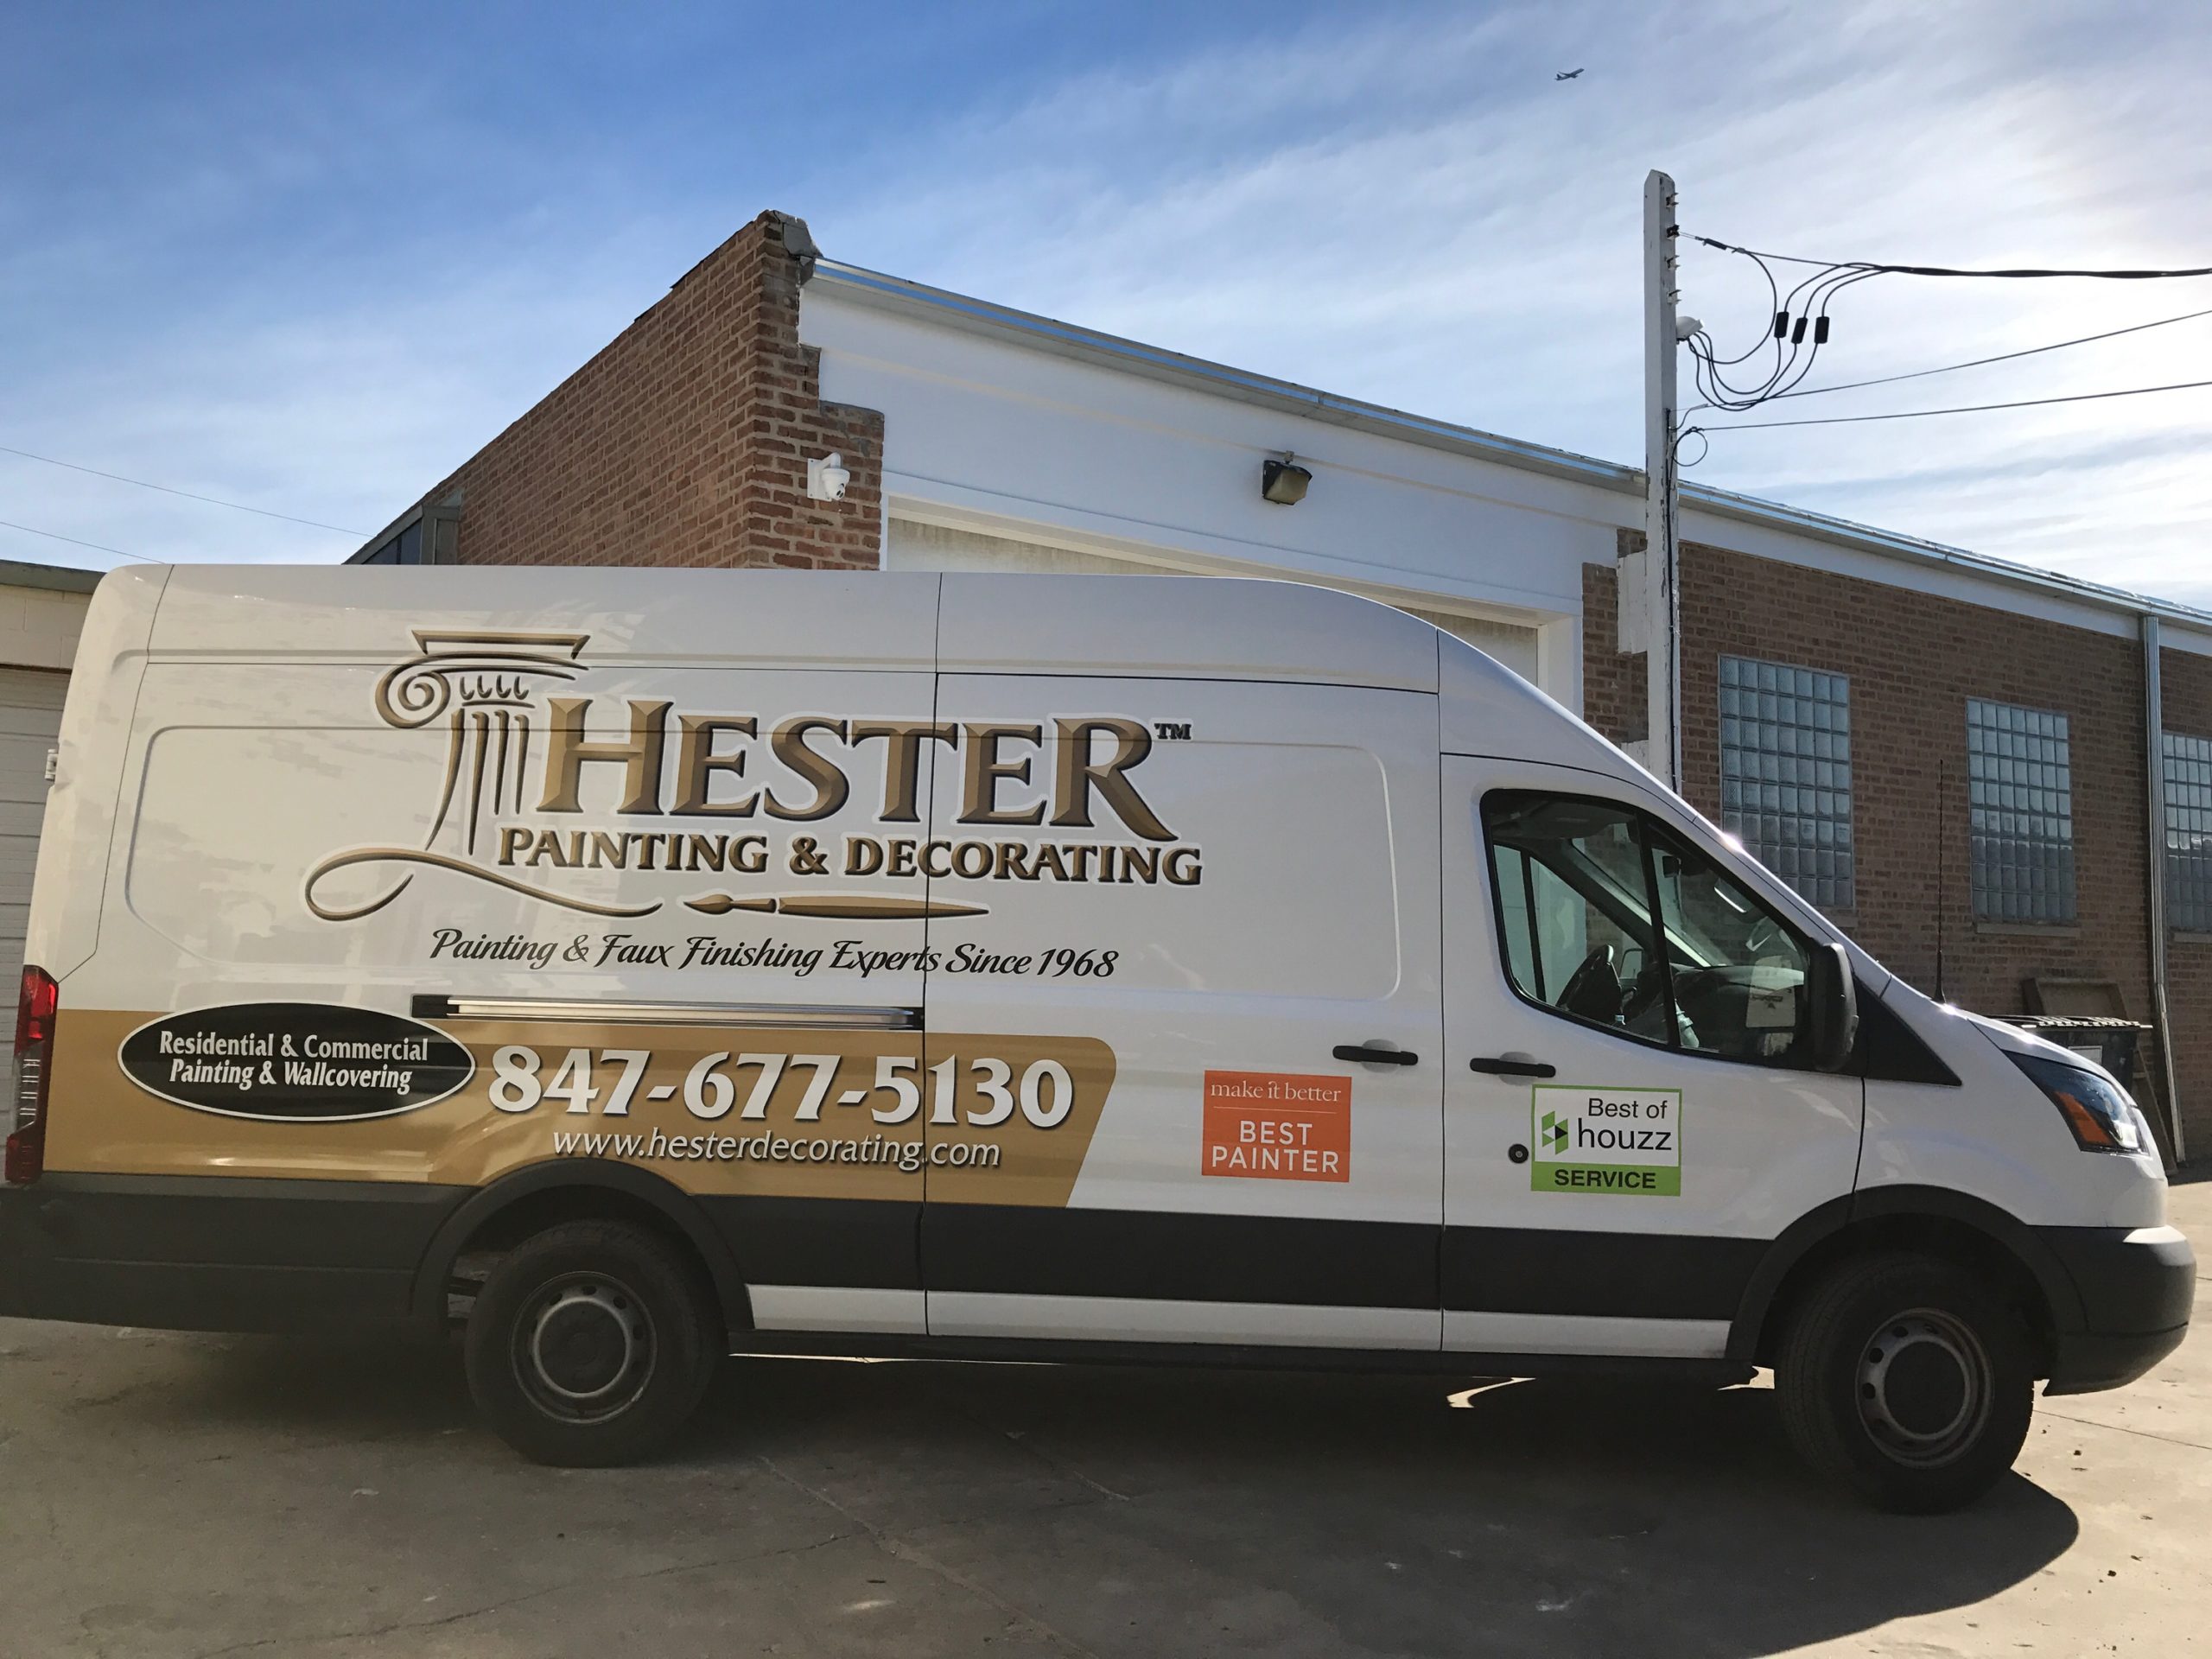 Look for Hester’s New Eye-Catching Truck!